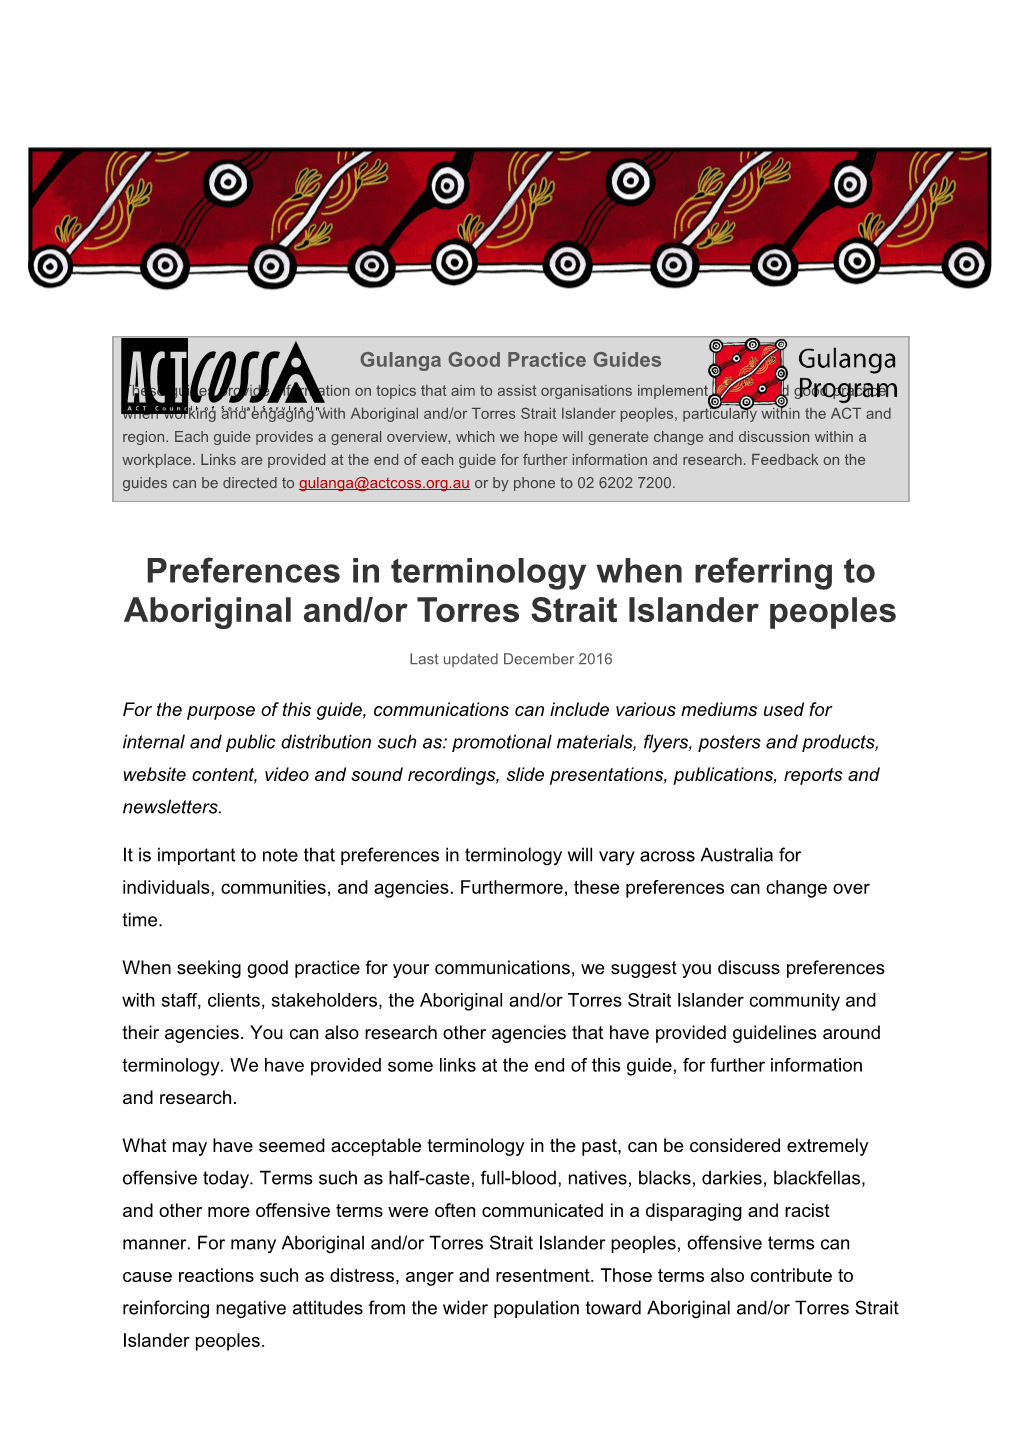 Preferences in Terminology When Referring to Aboriginal And/Or Torres Strait Islander Peoples